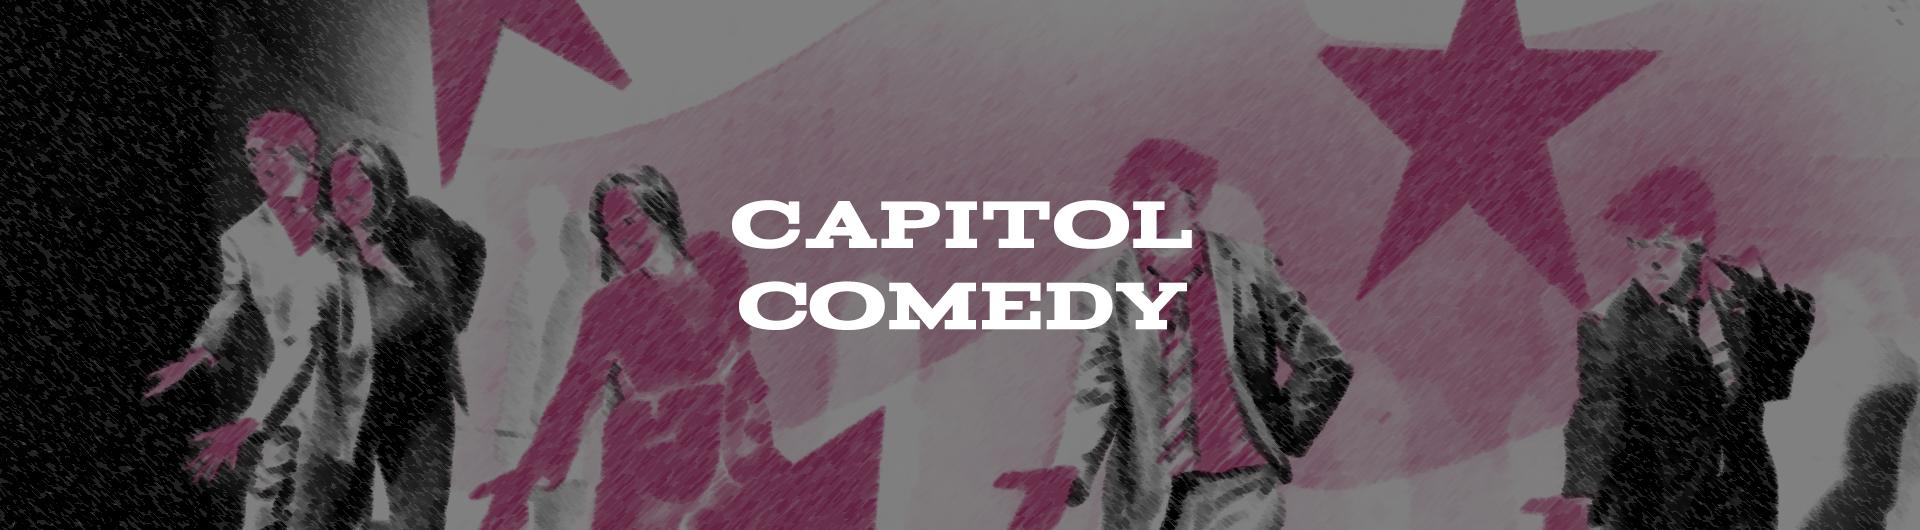 A stylized image of five members of the troupe with the headline Capitol Comedy overlaid.